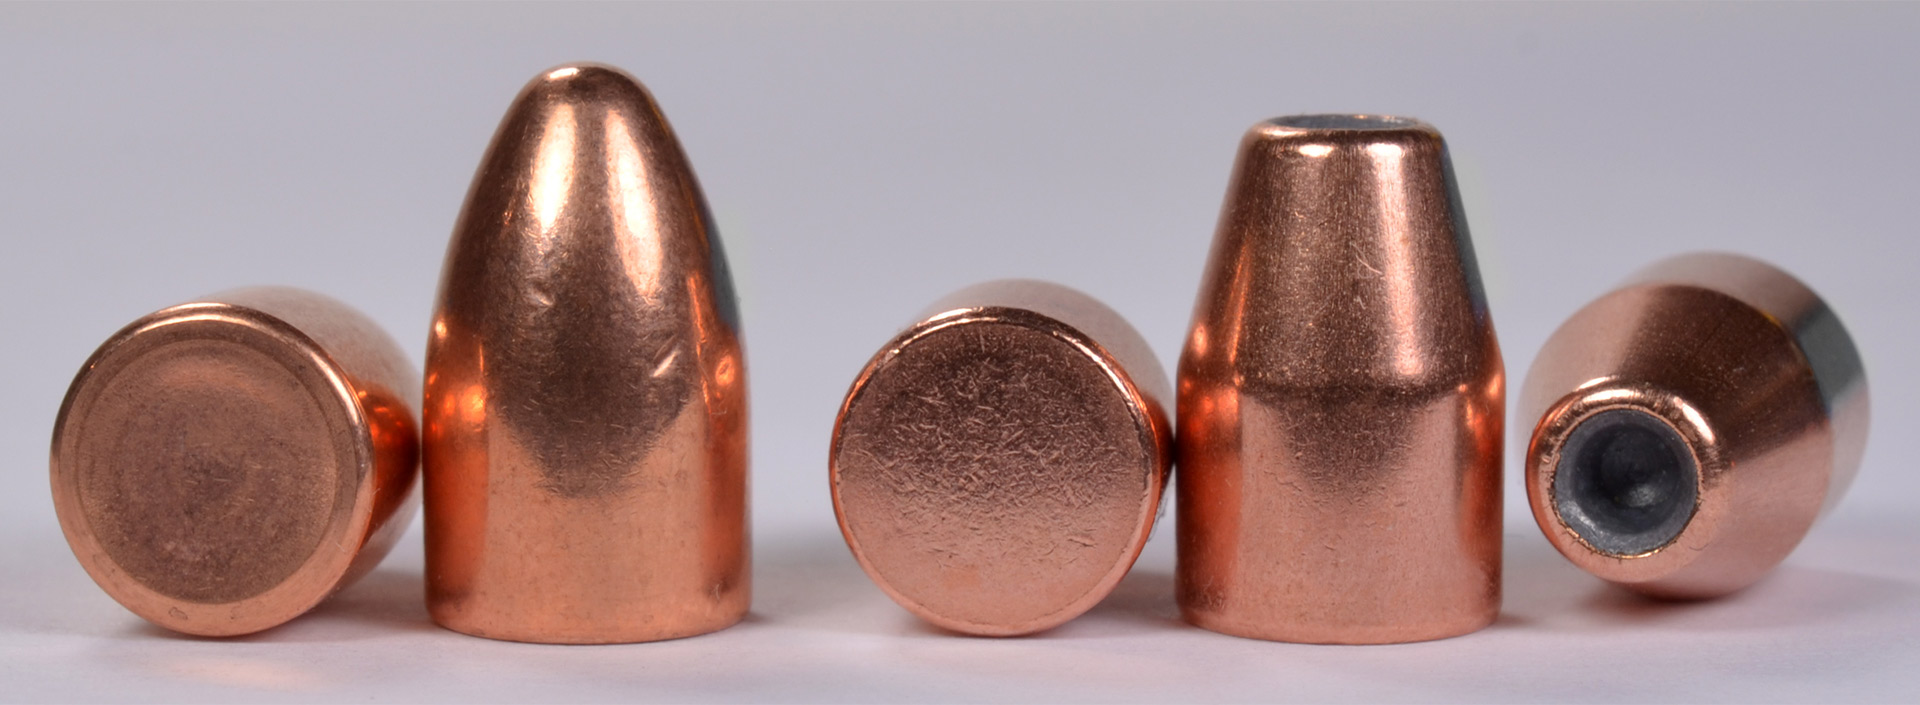 Plated bullets and JHP bullets